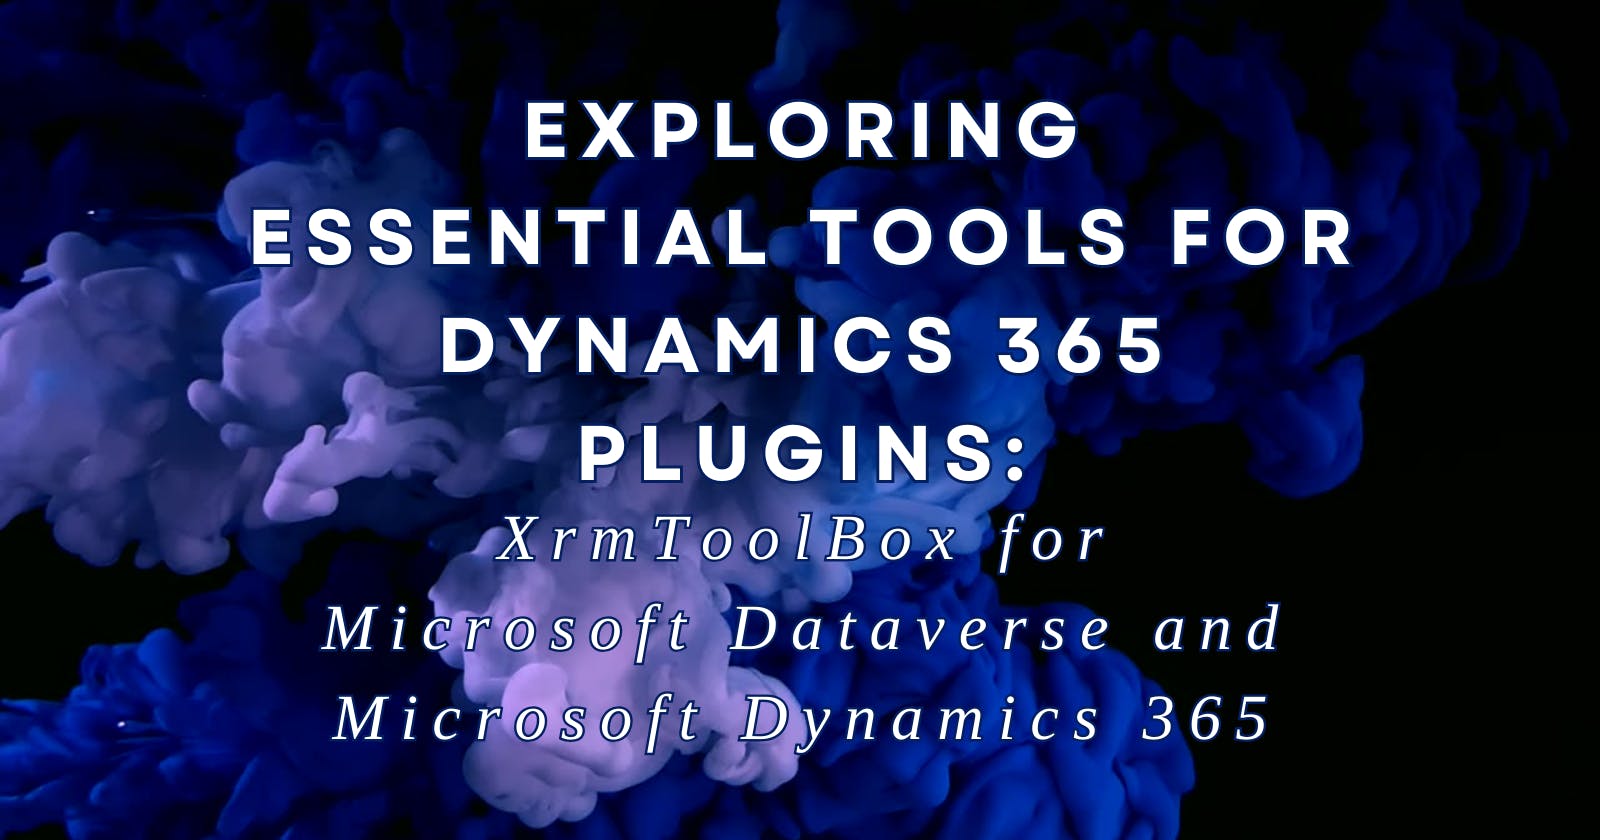 Exploring Essential Tools for Dynamics 365 Plugins: XrmToolBox for Microsoft Dataverse and Microsoft Dynamics 365